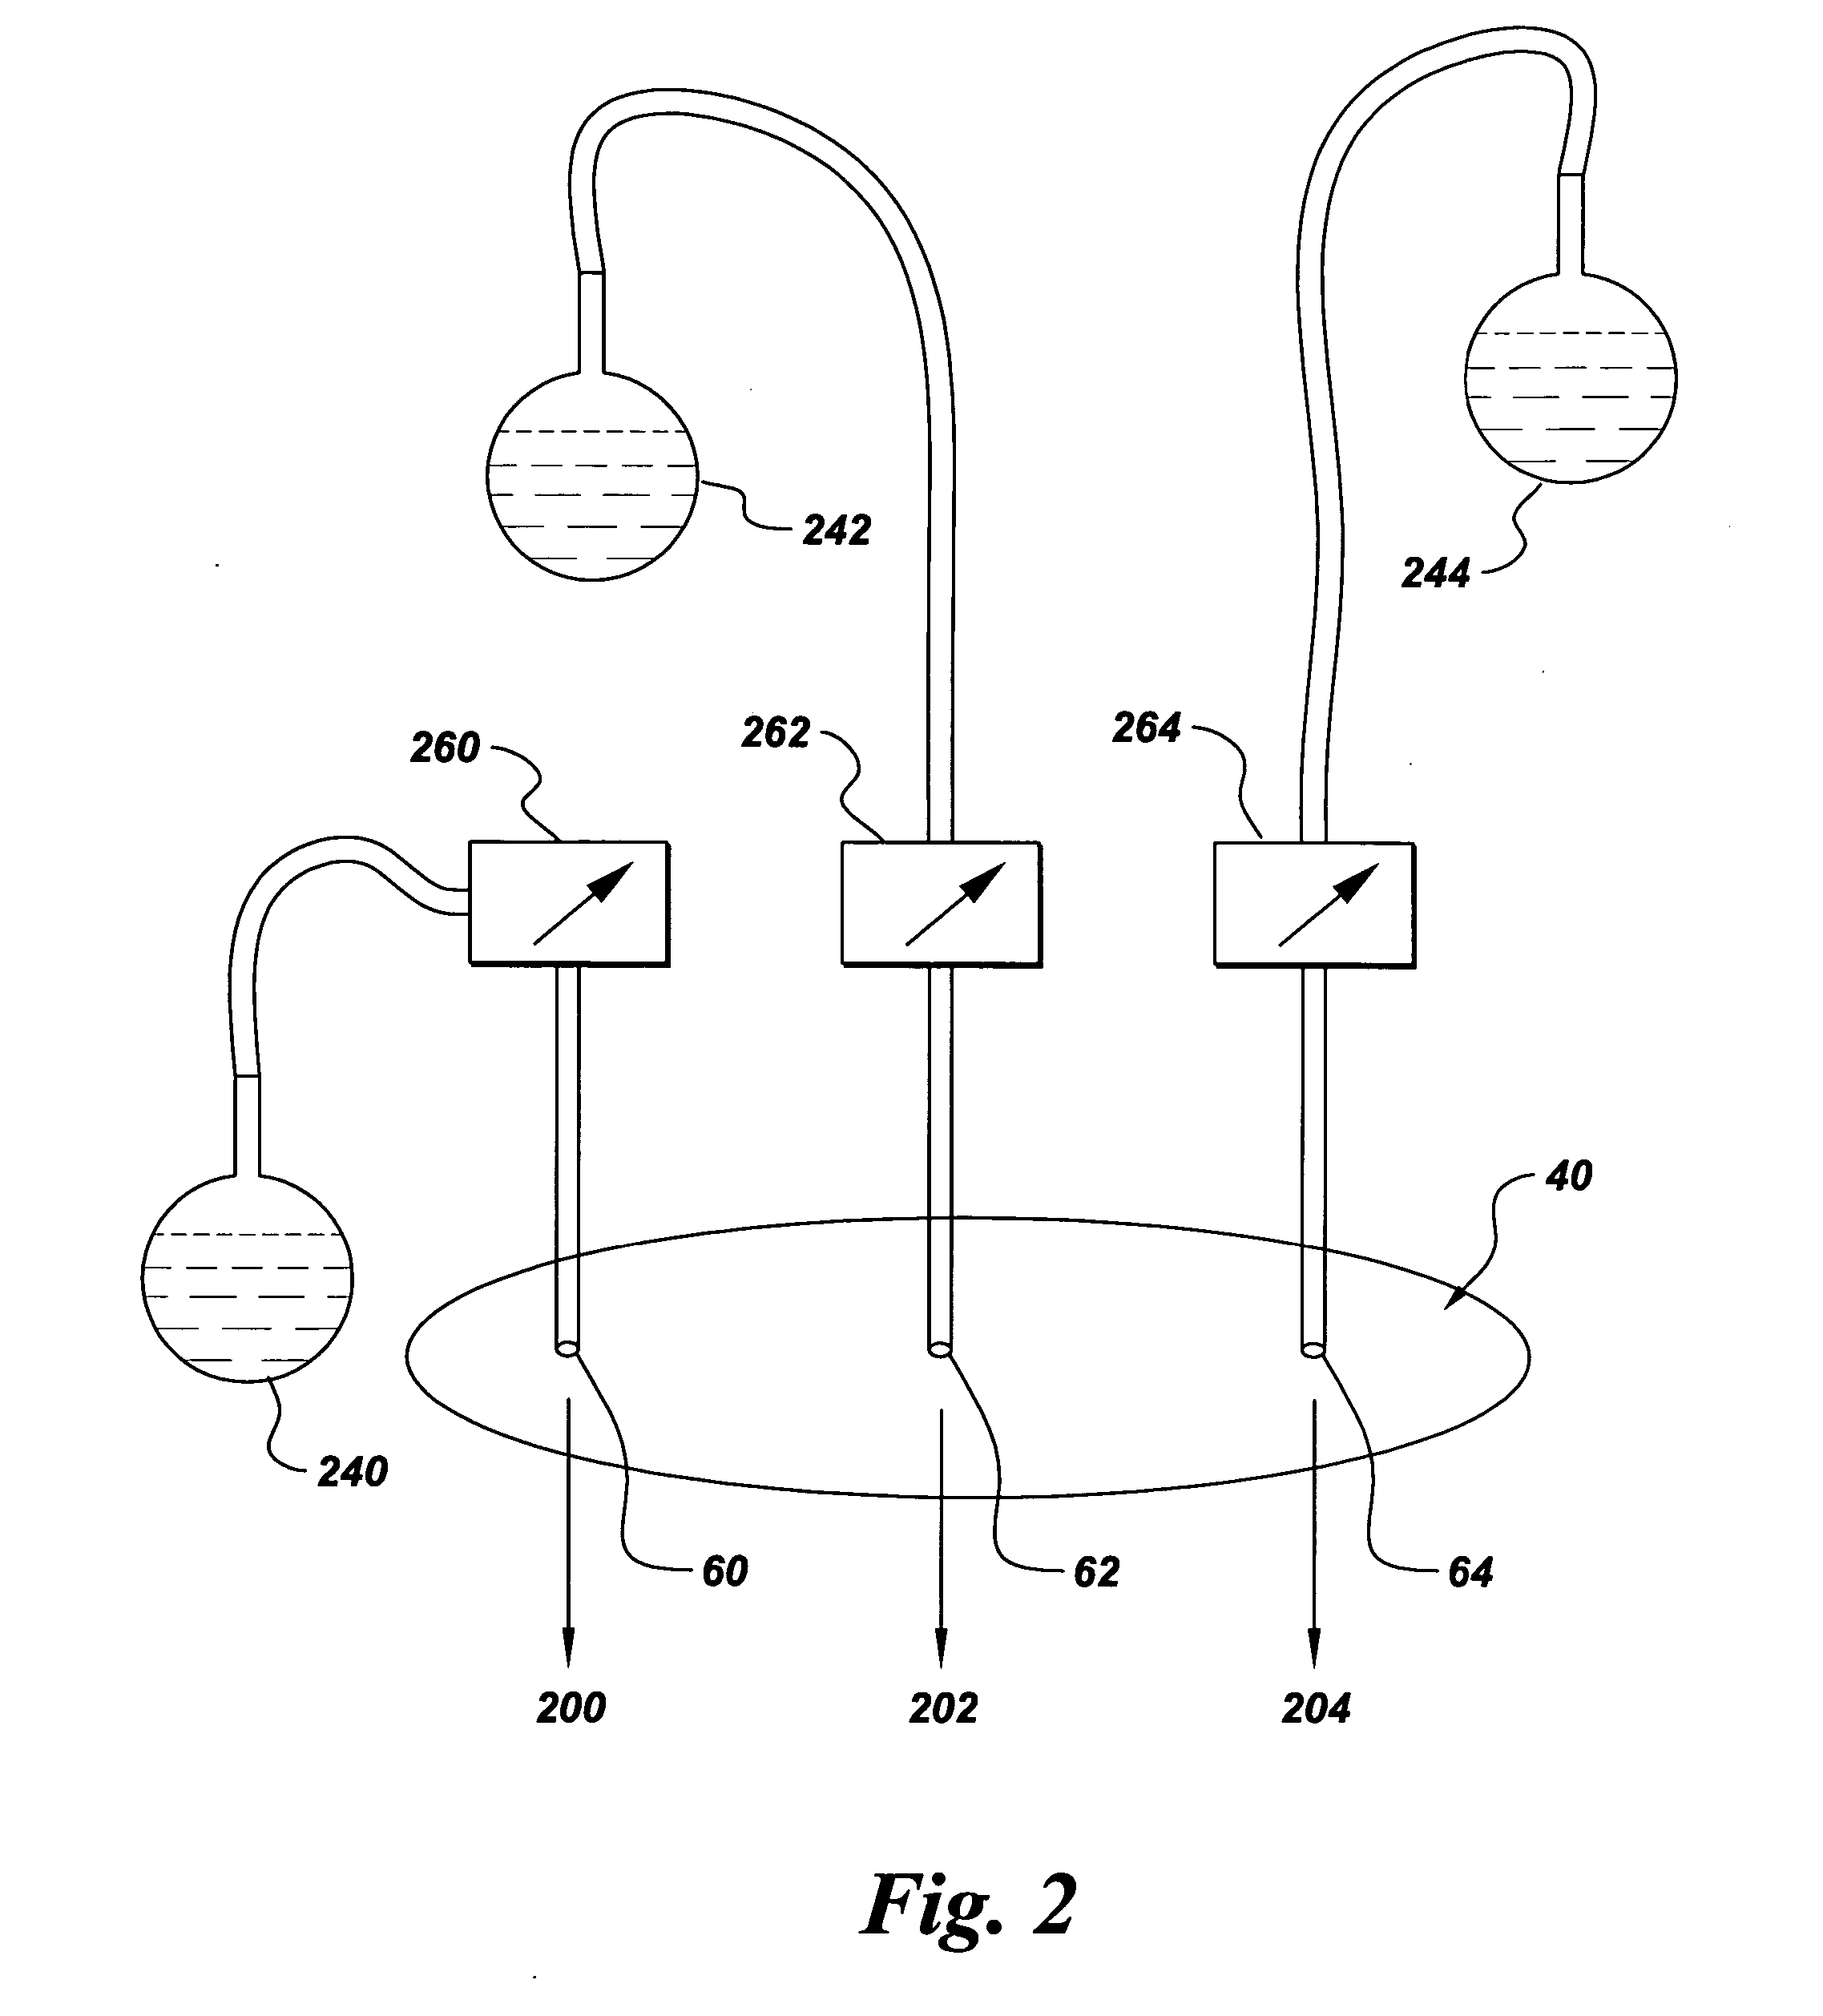 Apparatus for the evaporation of aqueous organic liquids and the production of powder pre-forms in flame hydrolysis processes